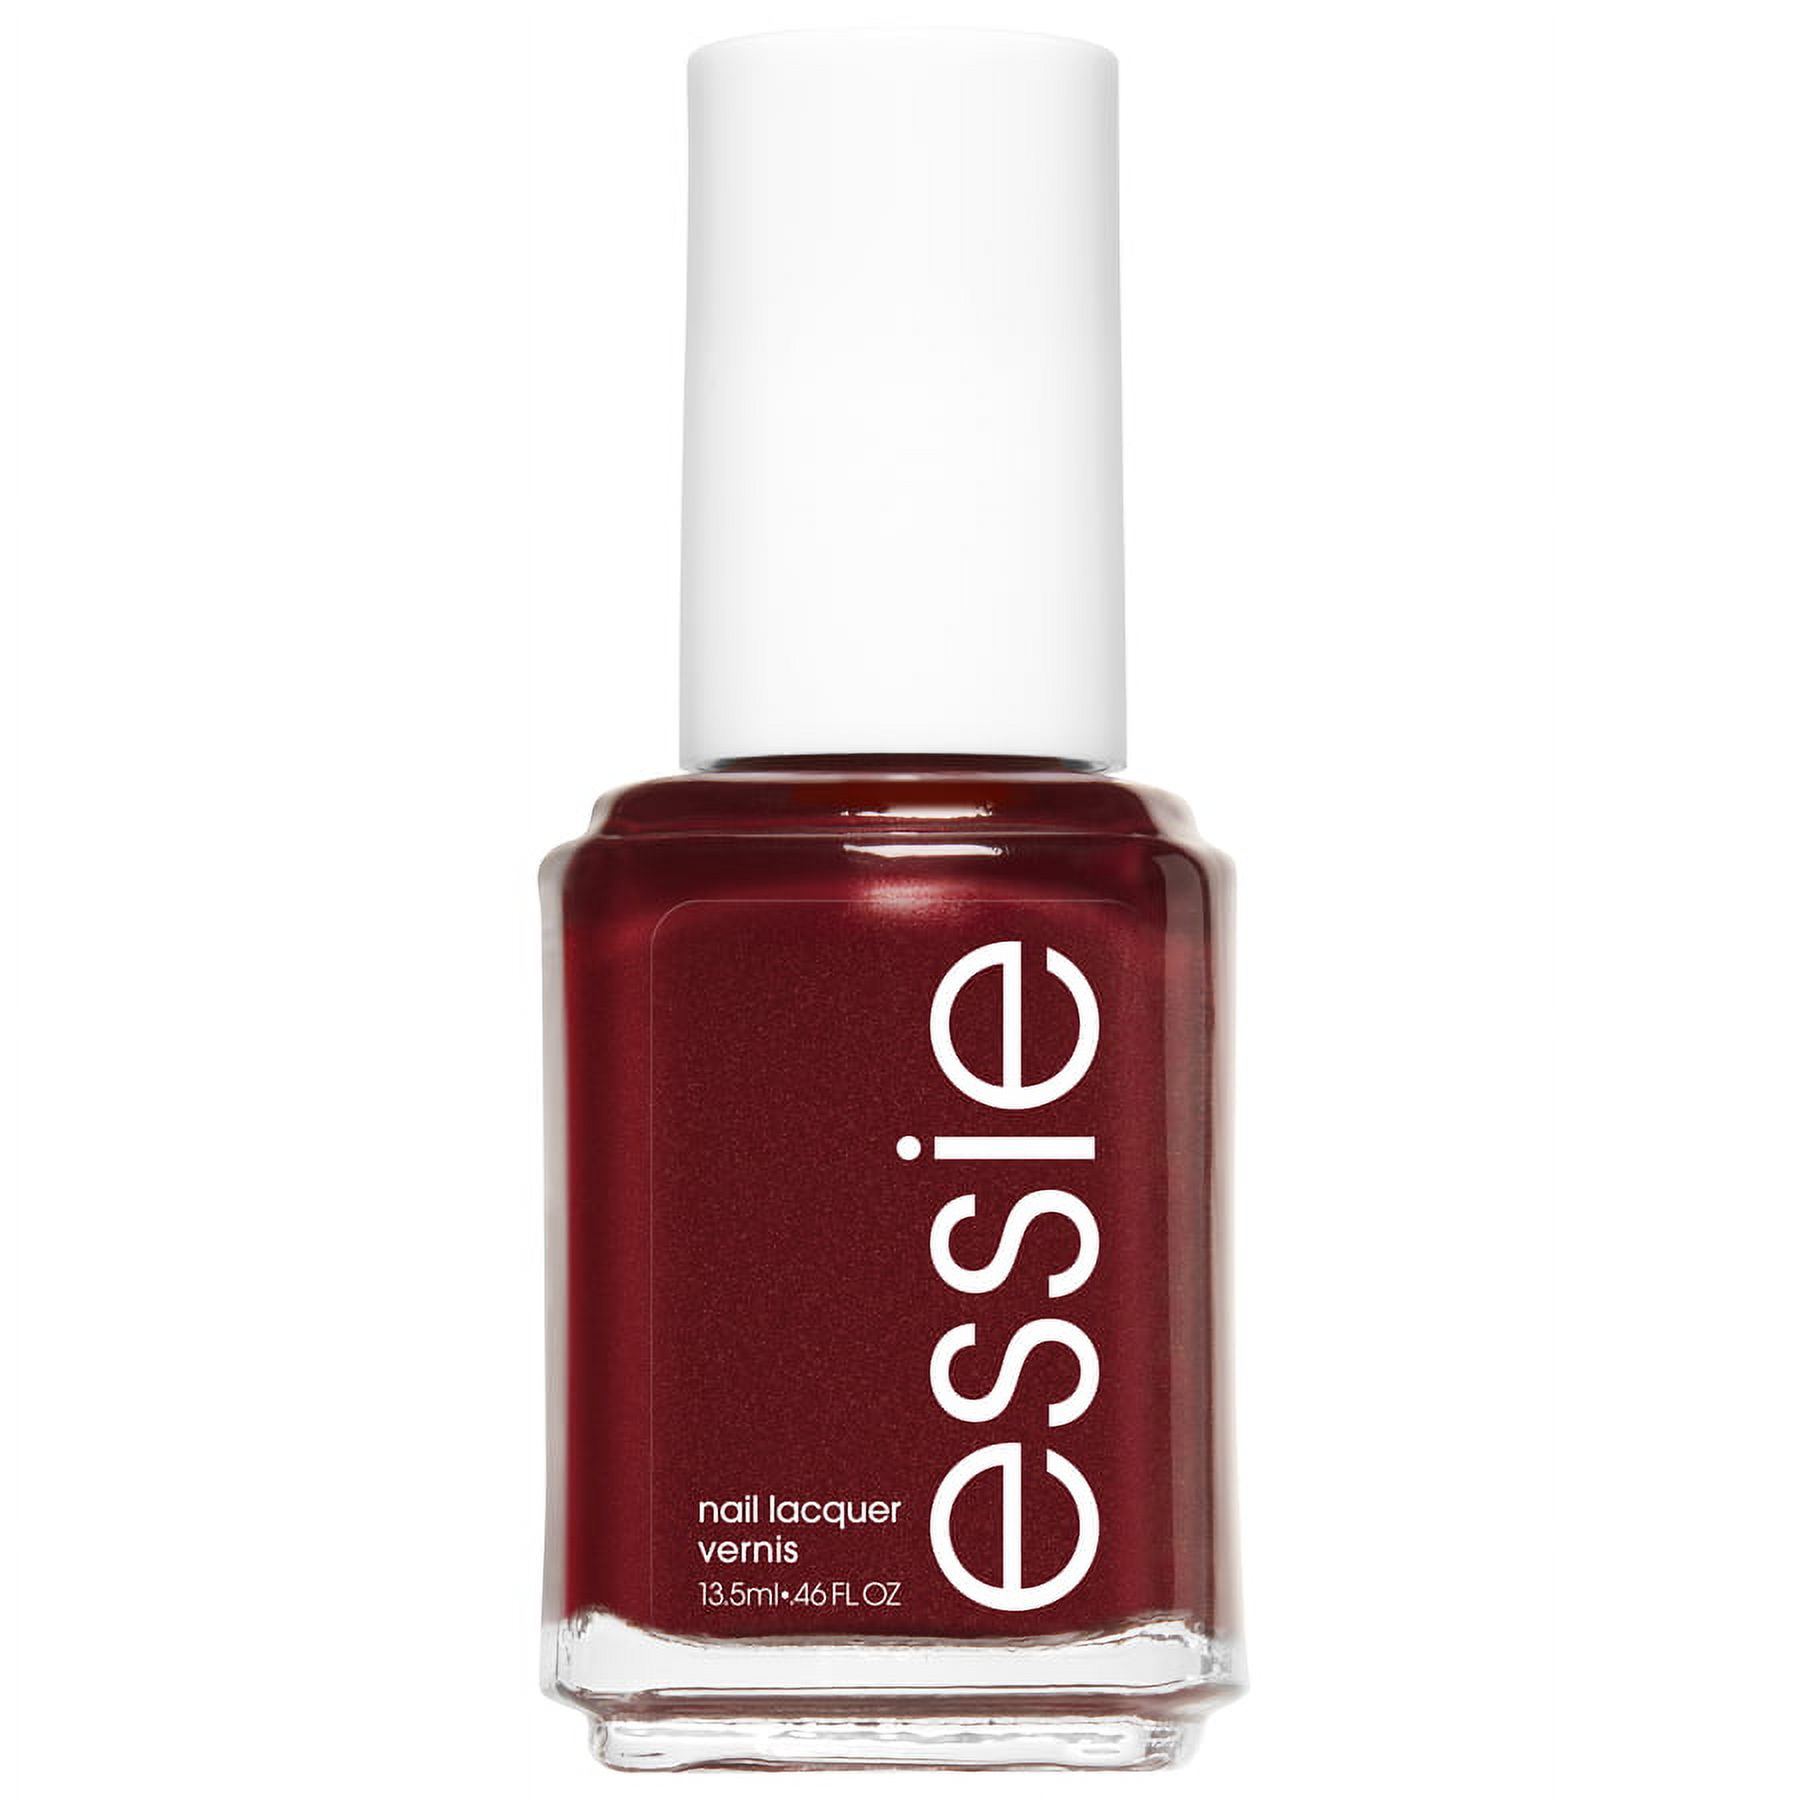 essie Nail Polish (Reds), Wrapped In Rubies, 0.46 fl oz - image 1 of 13